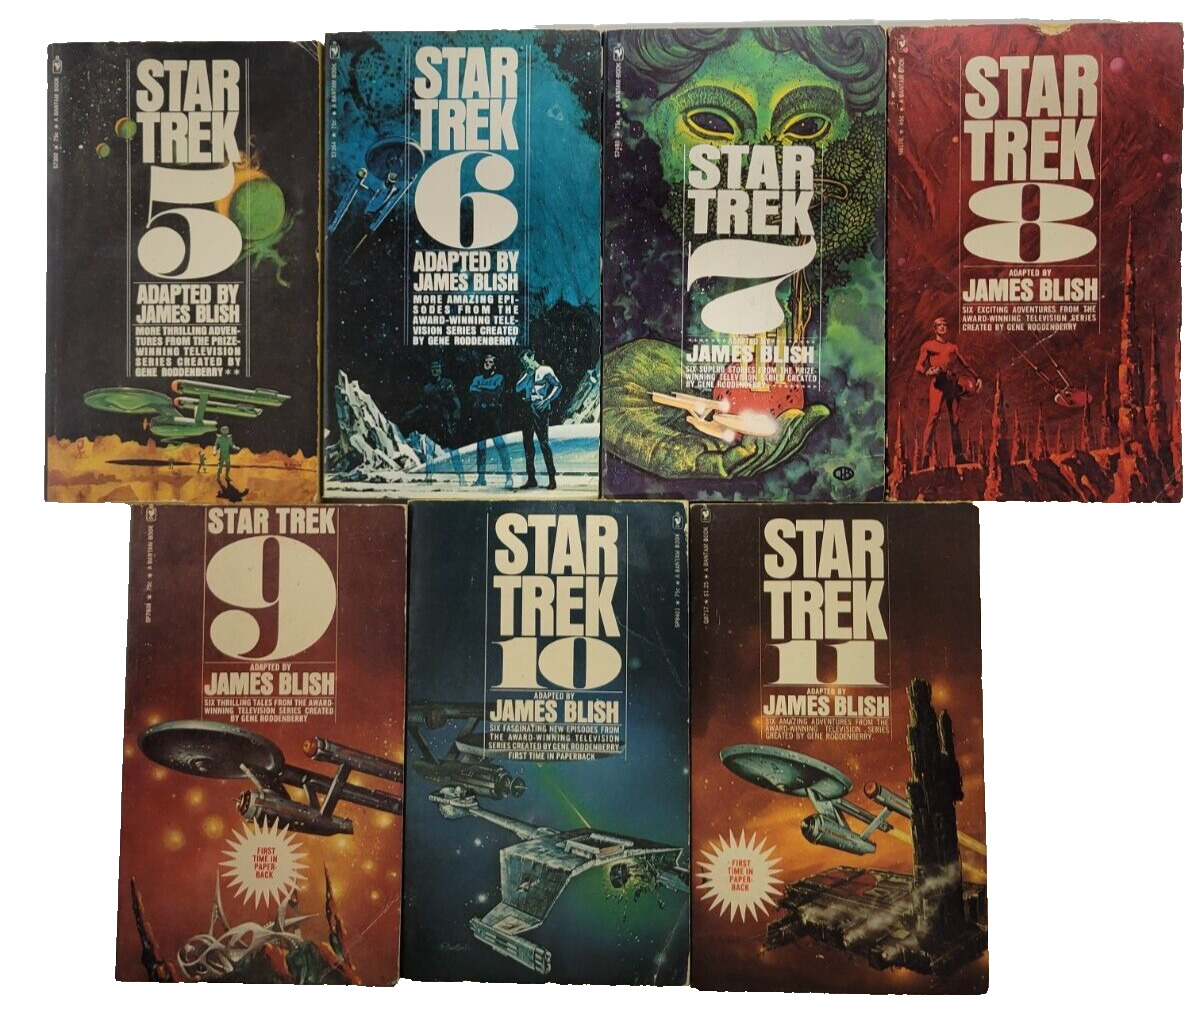 LOT OF 7- STAR TREK 5 6 7 8 9 10 11 Sci-fi Paperback Book Adapted by James Blish